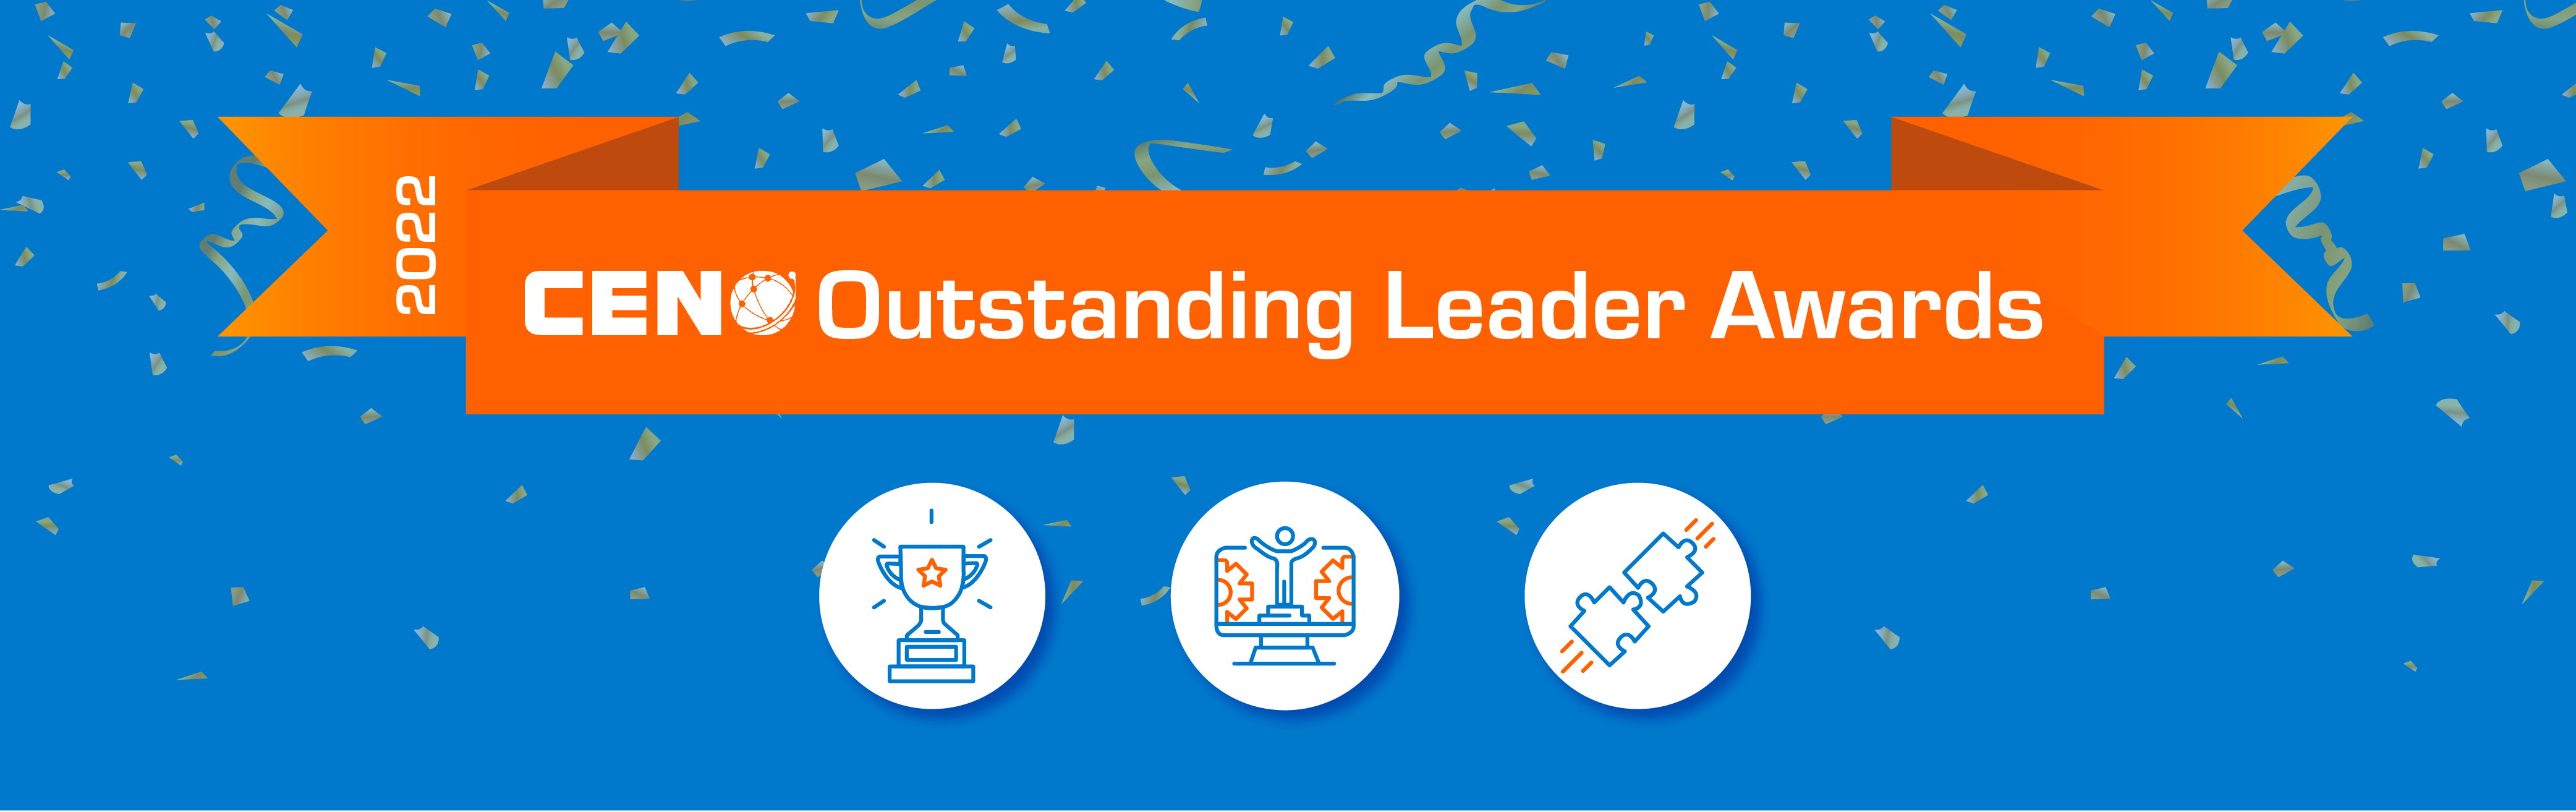 Header image with blue background, a CEN logo, and an orange banner that says, "2022 Outstanding Leader Awards."